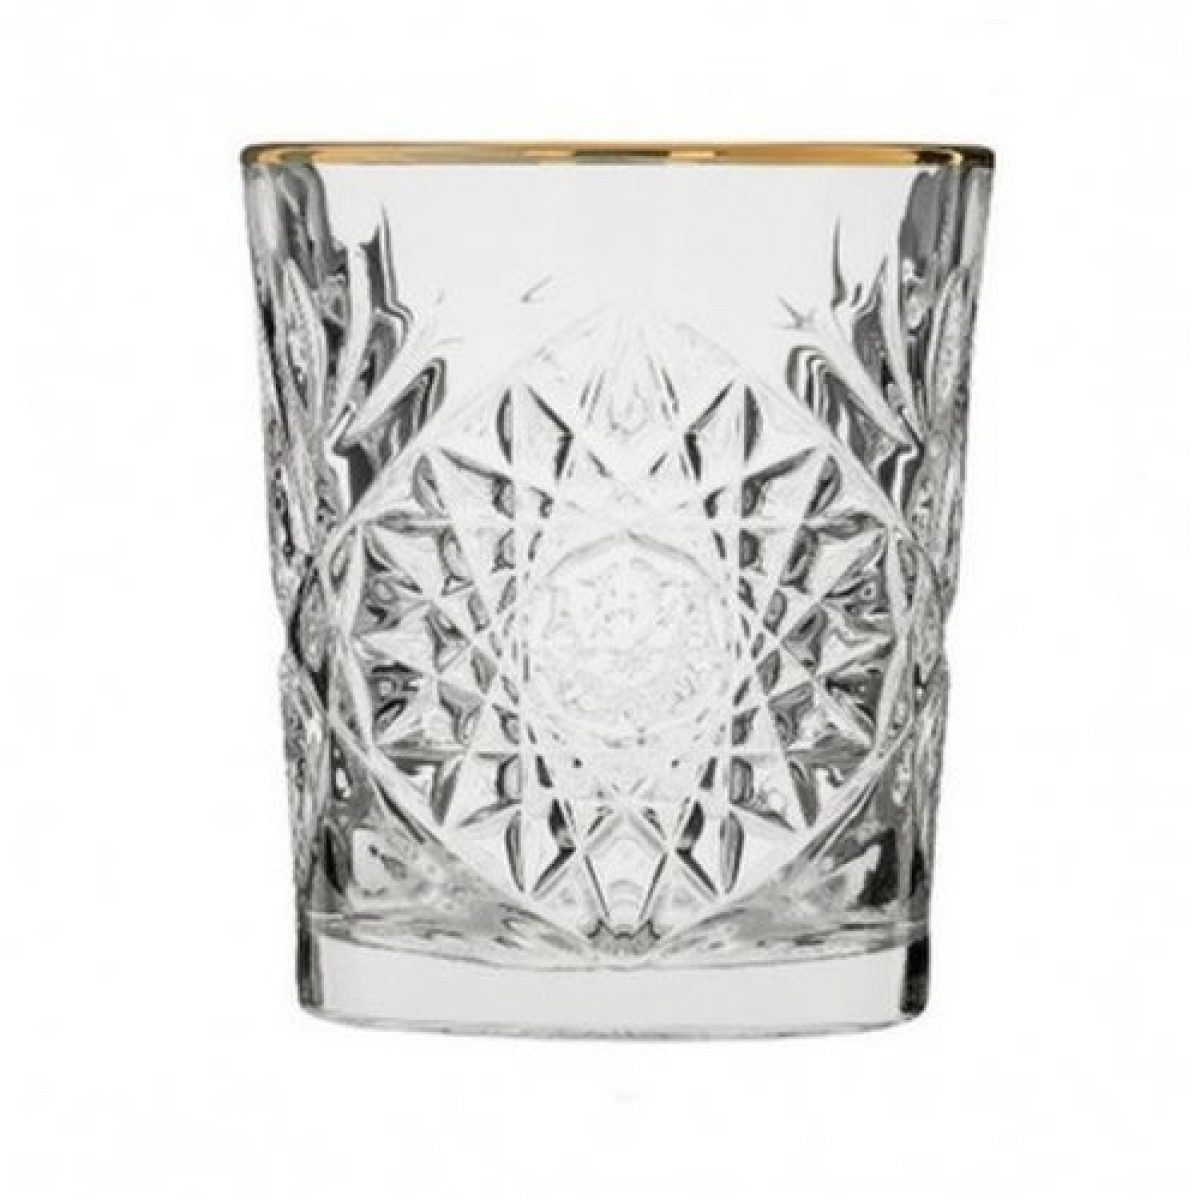 richting Compliment Abstractie Libbey - Hobstar glas - gouden rand - 35 cl - K'OOK!